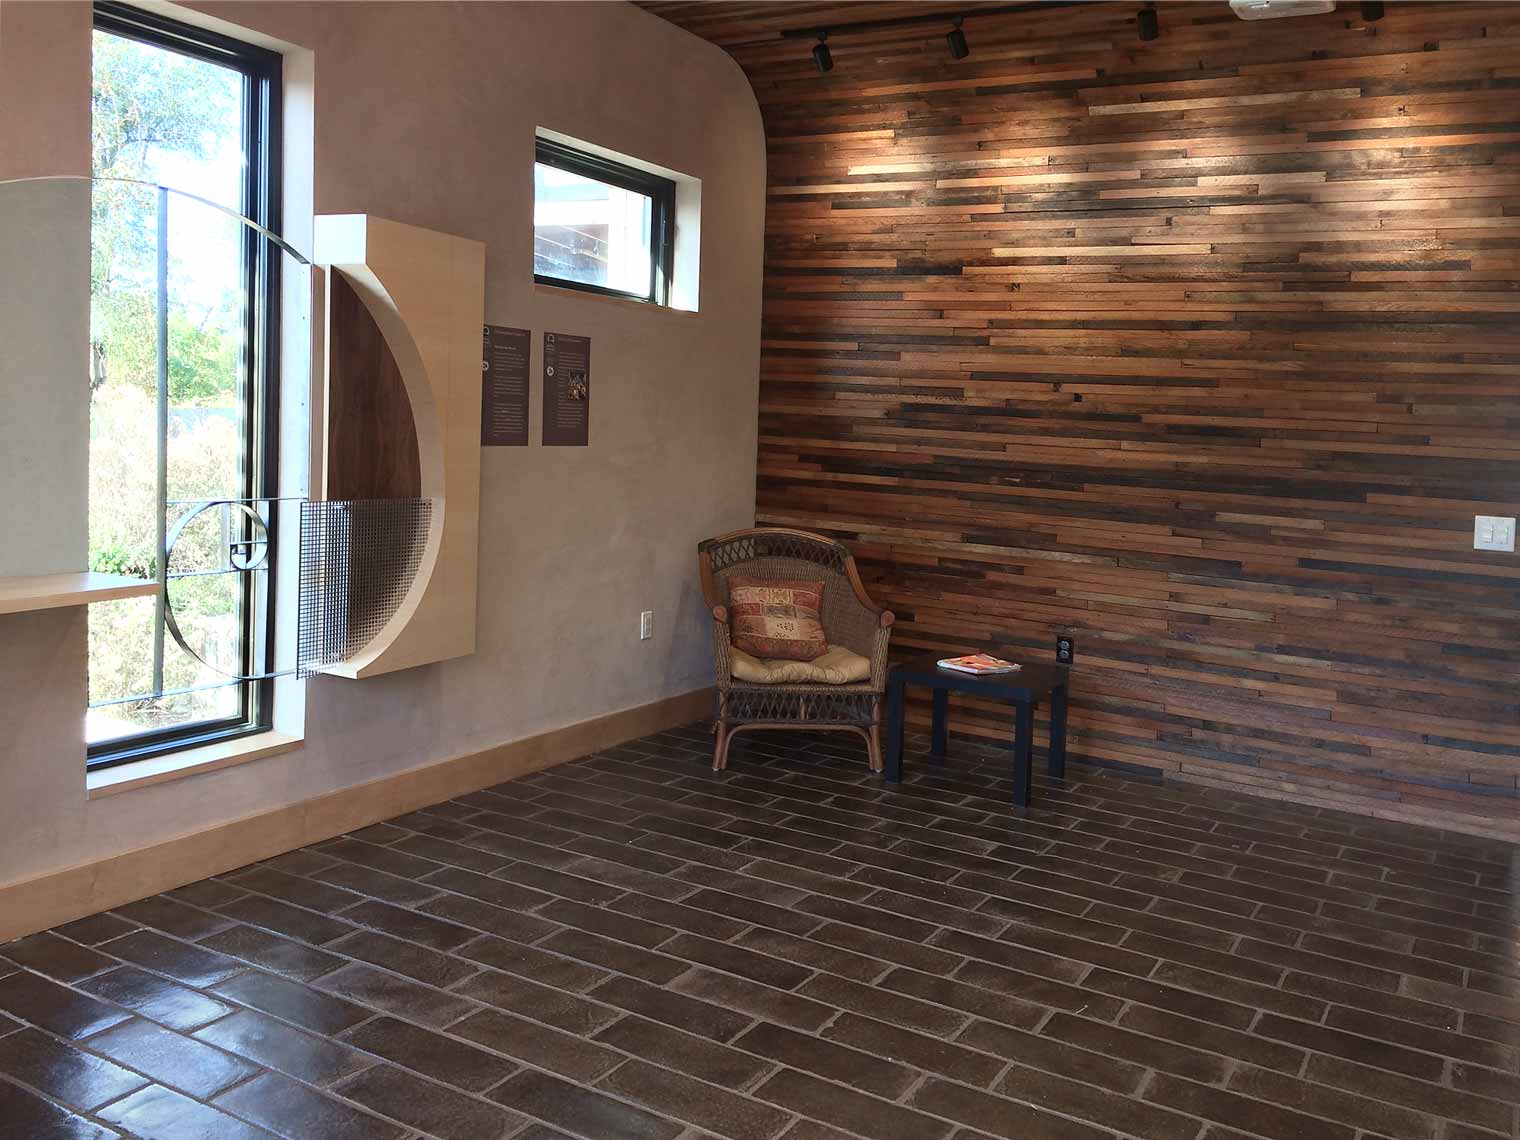 The “Sacred Commons” area at Healing Passages Birth & Wellness Center at the Green & Main building features wooden lathe wall treatment, clay tile, curved wall and ceiling and a spiral art sculpture.